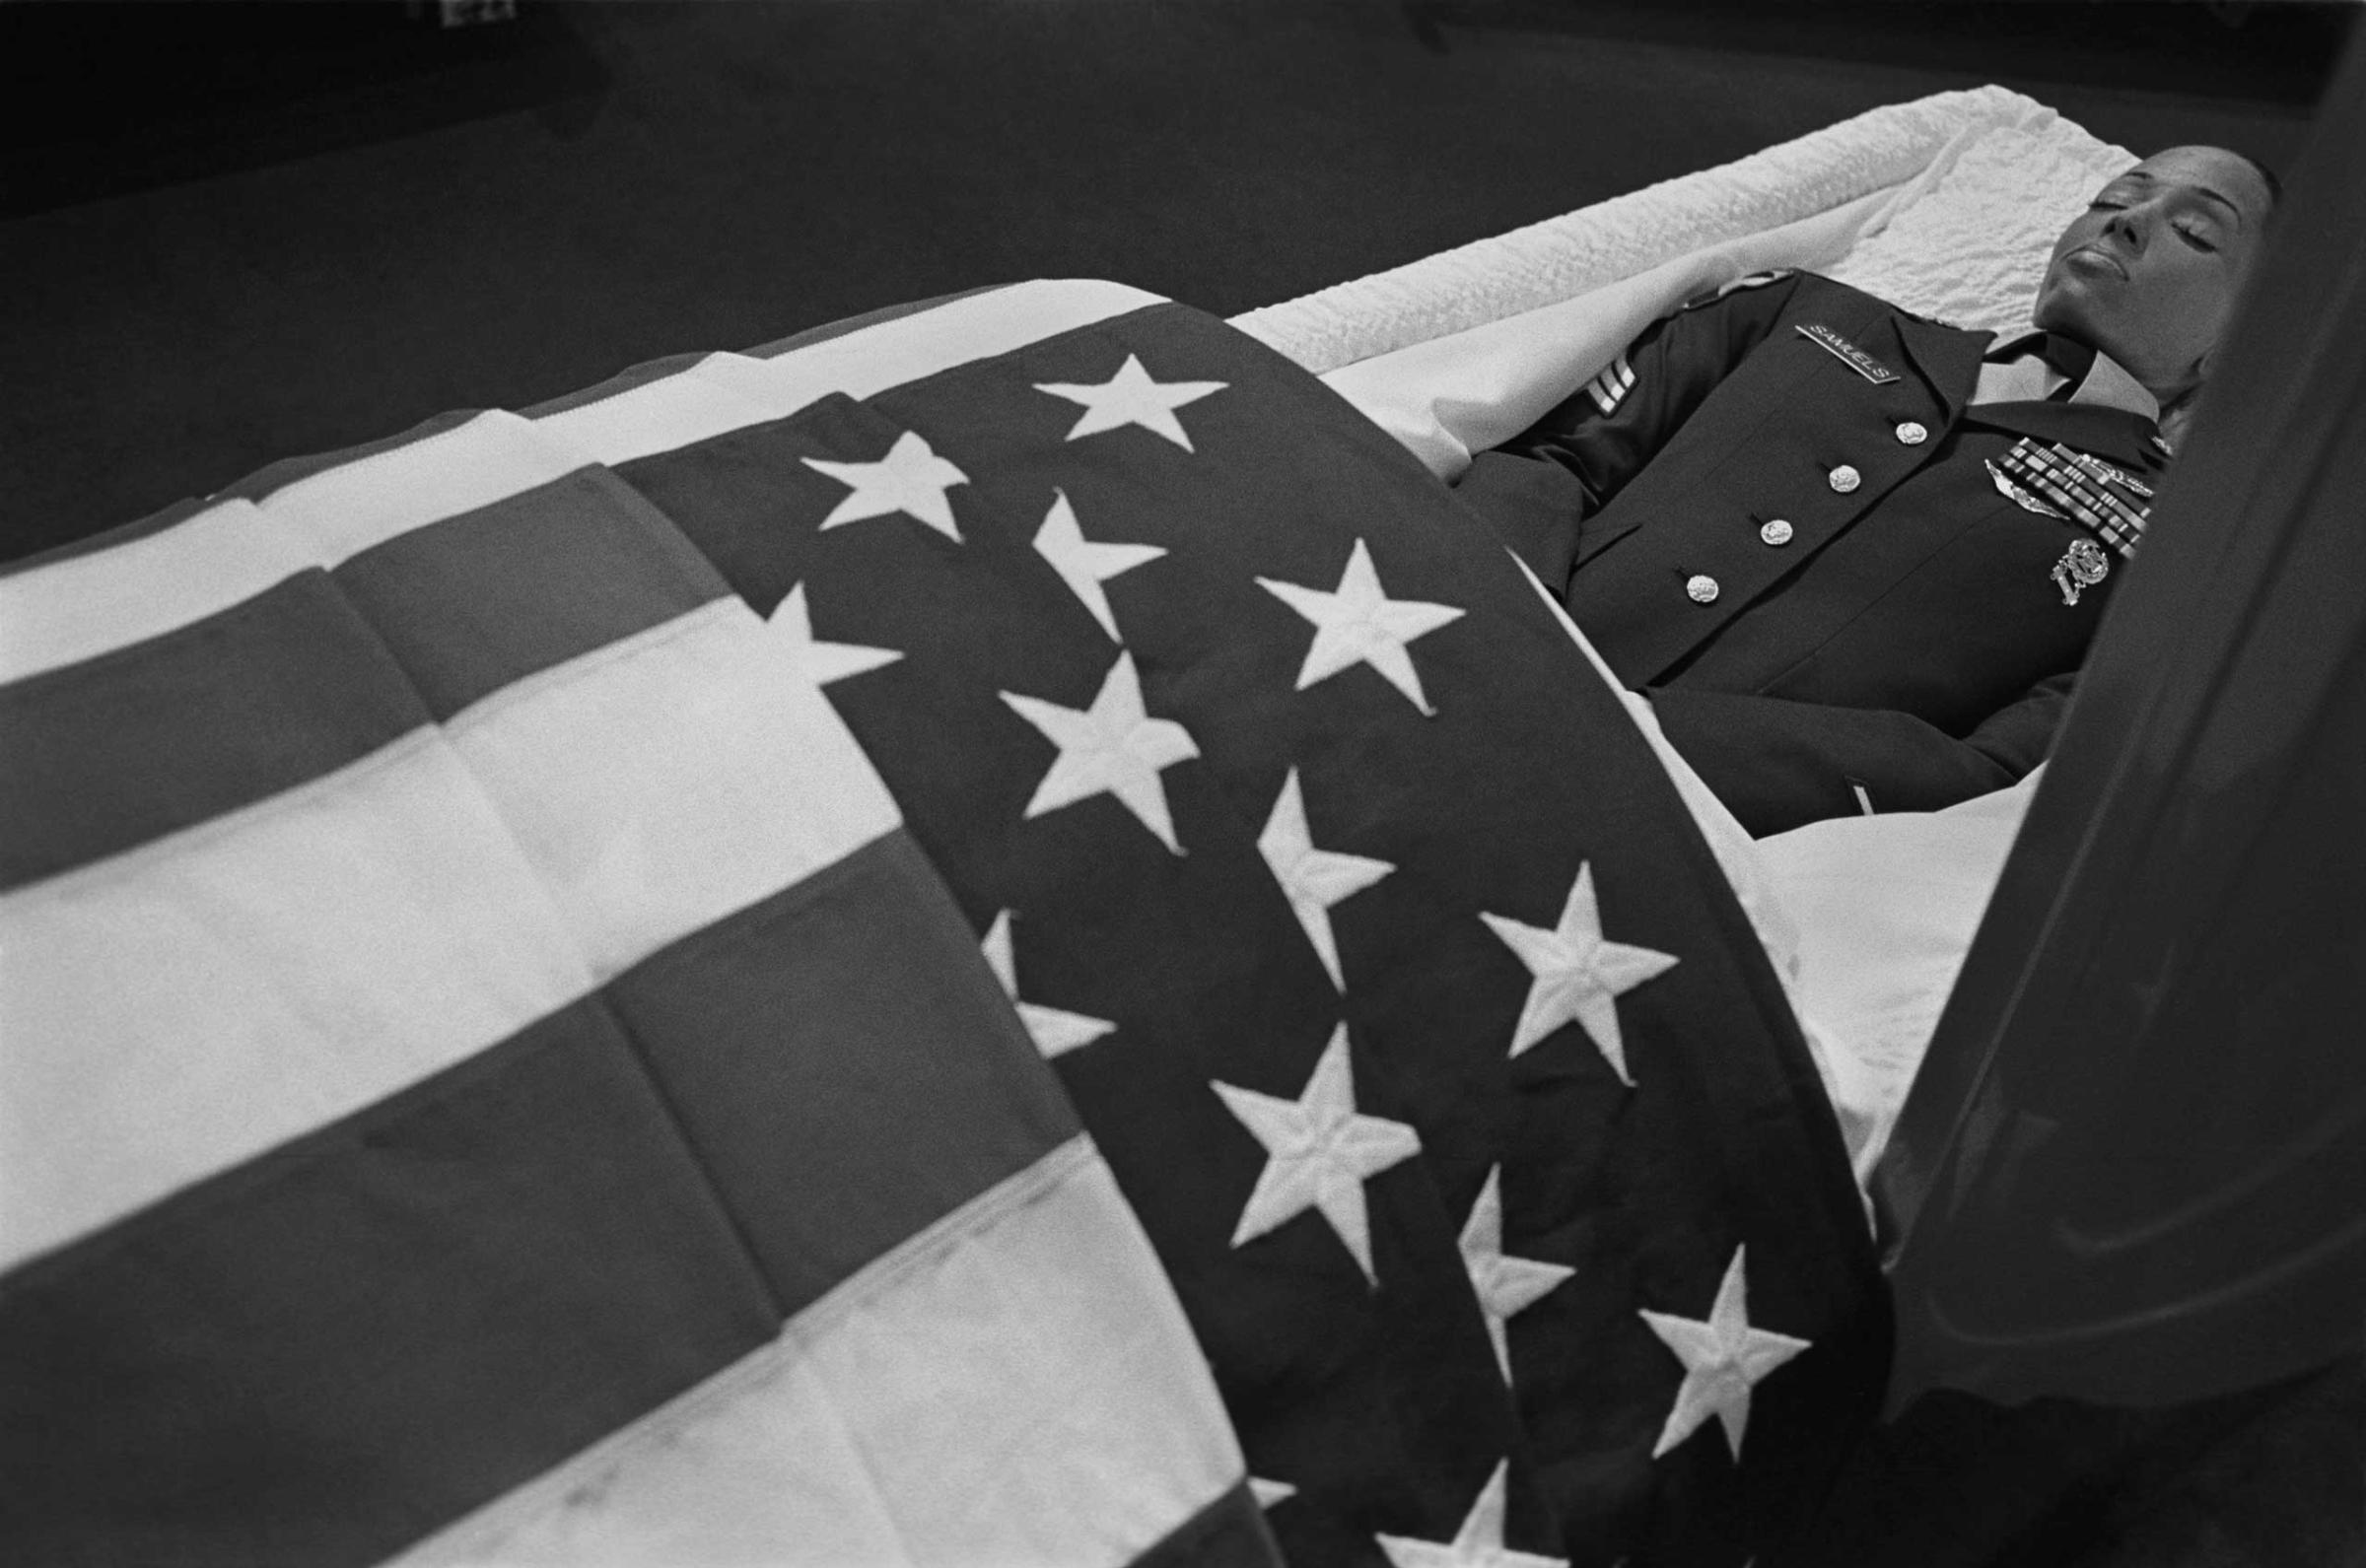 TITLE: Sgt. Princess C. Samuels, victim of "indirect fire," 2007EXTENDED CAPTION: The body of twenty-two-year-old Sgt. Princess C. Samuels of the U.S. Army rests in a coffin at the Jericho City of Praise prior to a viewing in Landover, Maryland, August 31, 2007. Sgt. Samuels, an imagery specialist, died in Taji, Iraq as the result of "indirect fire."